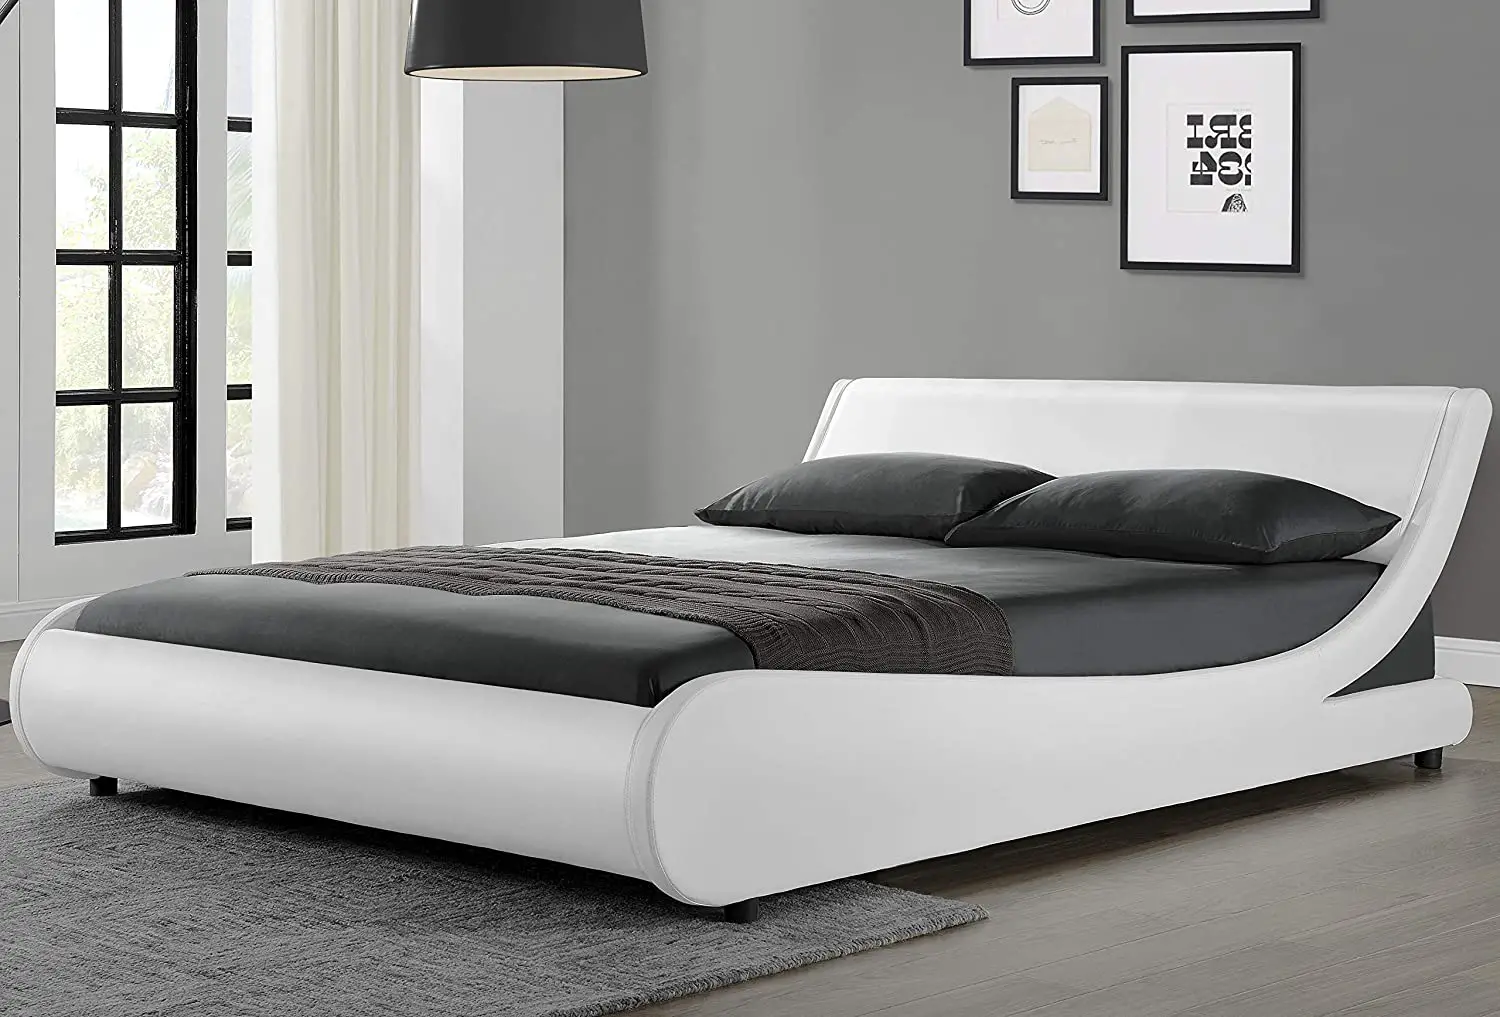 12 King Size Bed Frames That Look, Memomad Bali Storage Platform Bed With Drawers Twin Size Off White